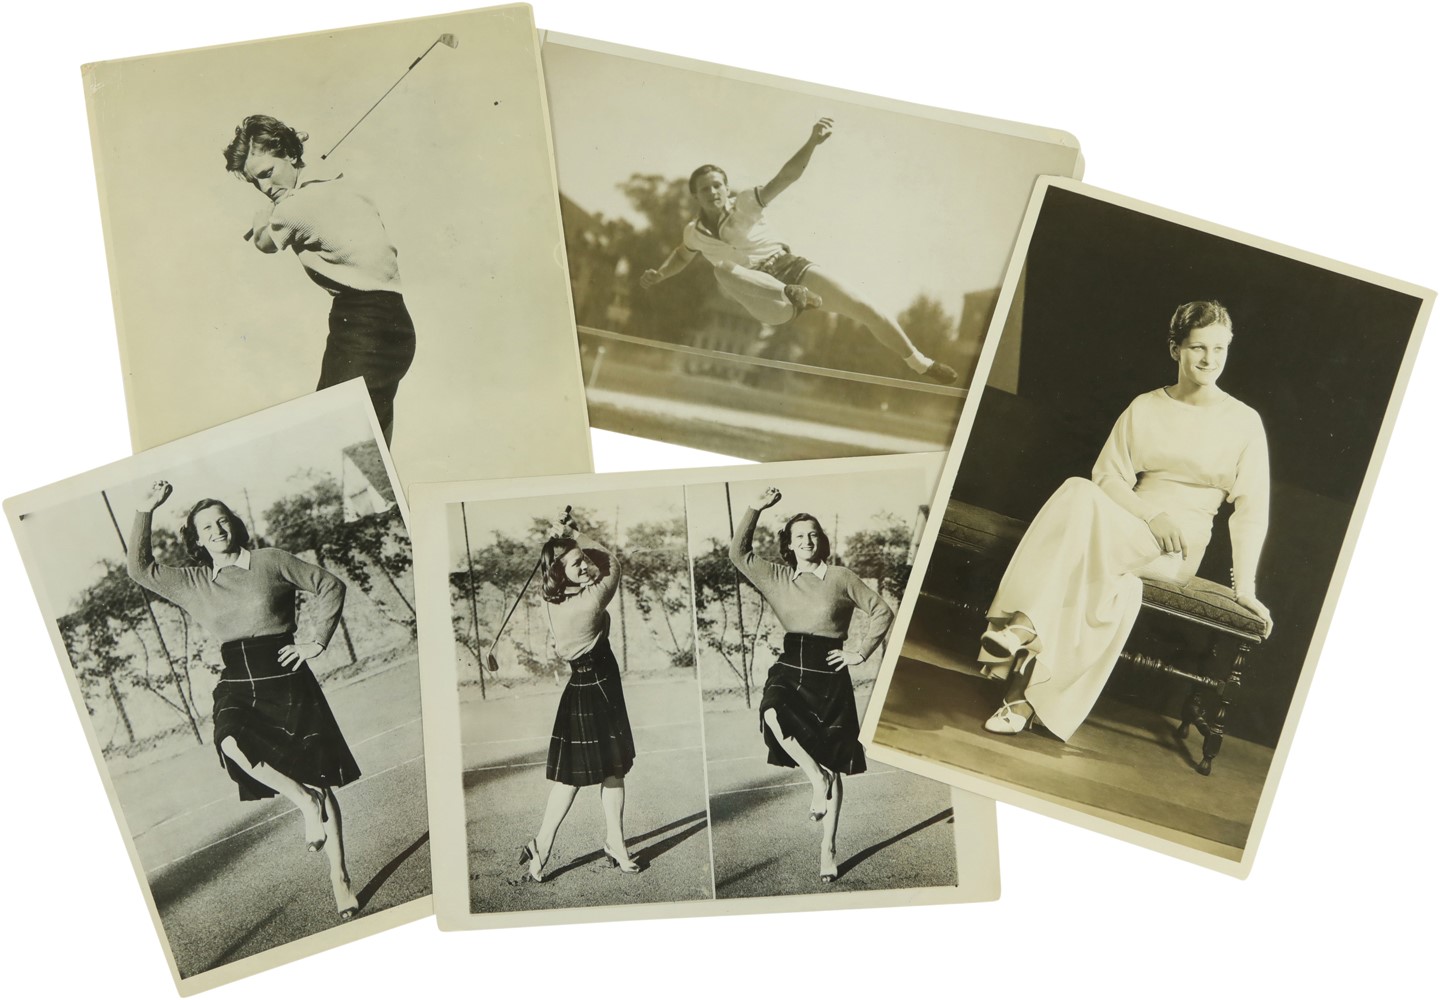 The Brown Brothers Collection - Five Nice Babe Didrikson Photographs